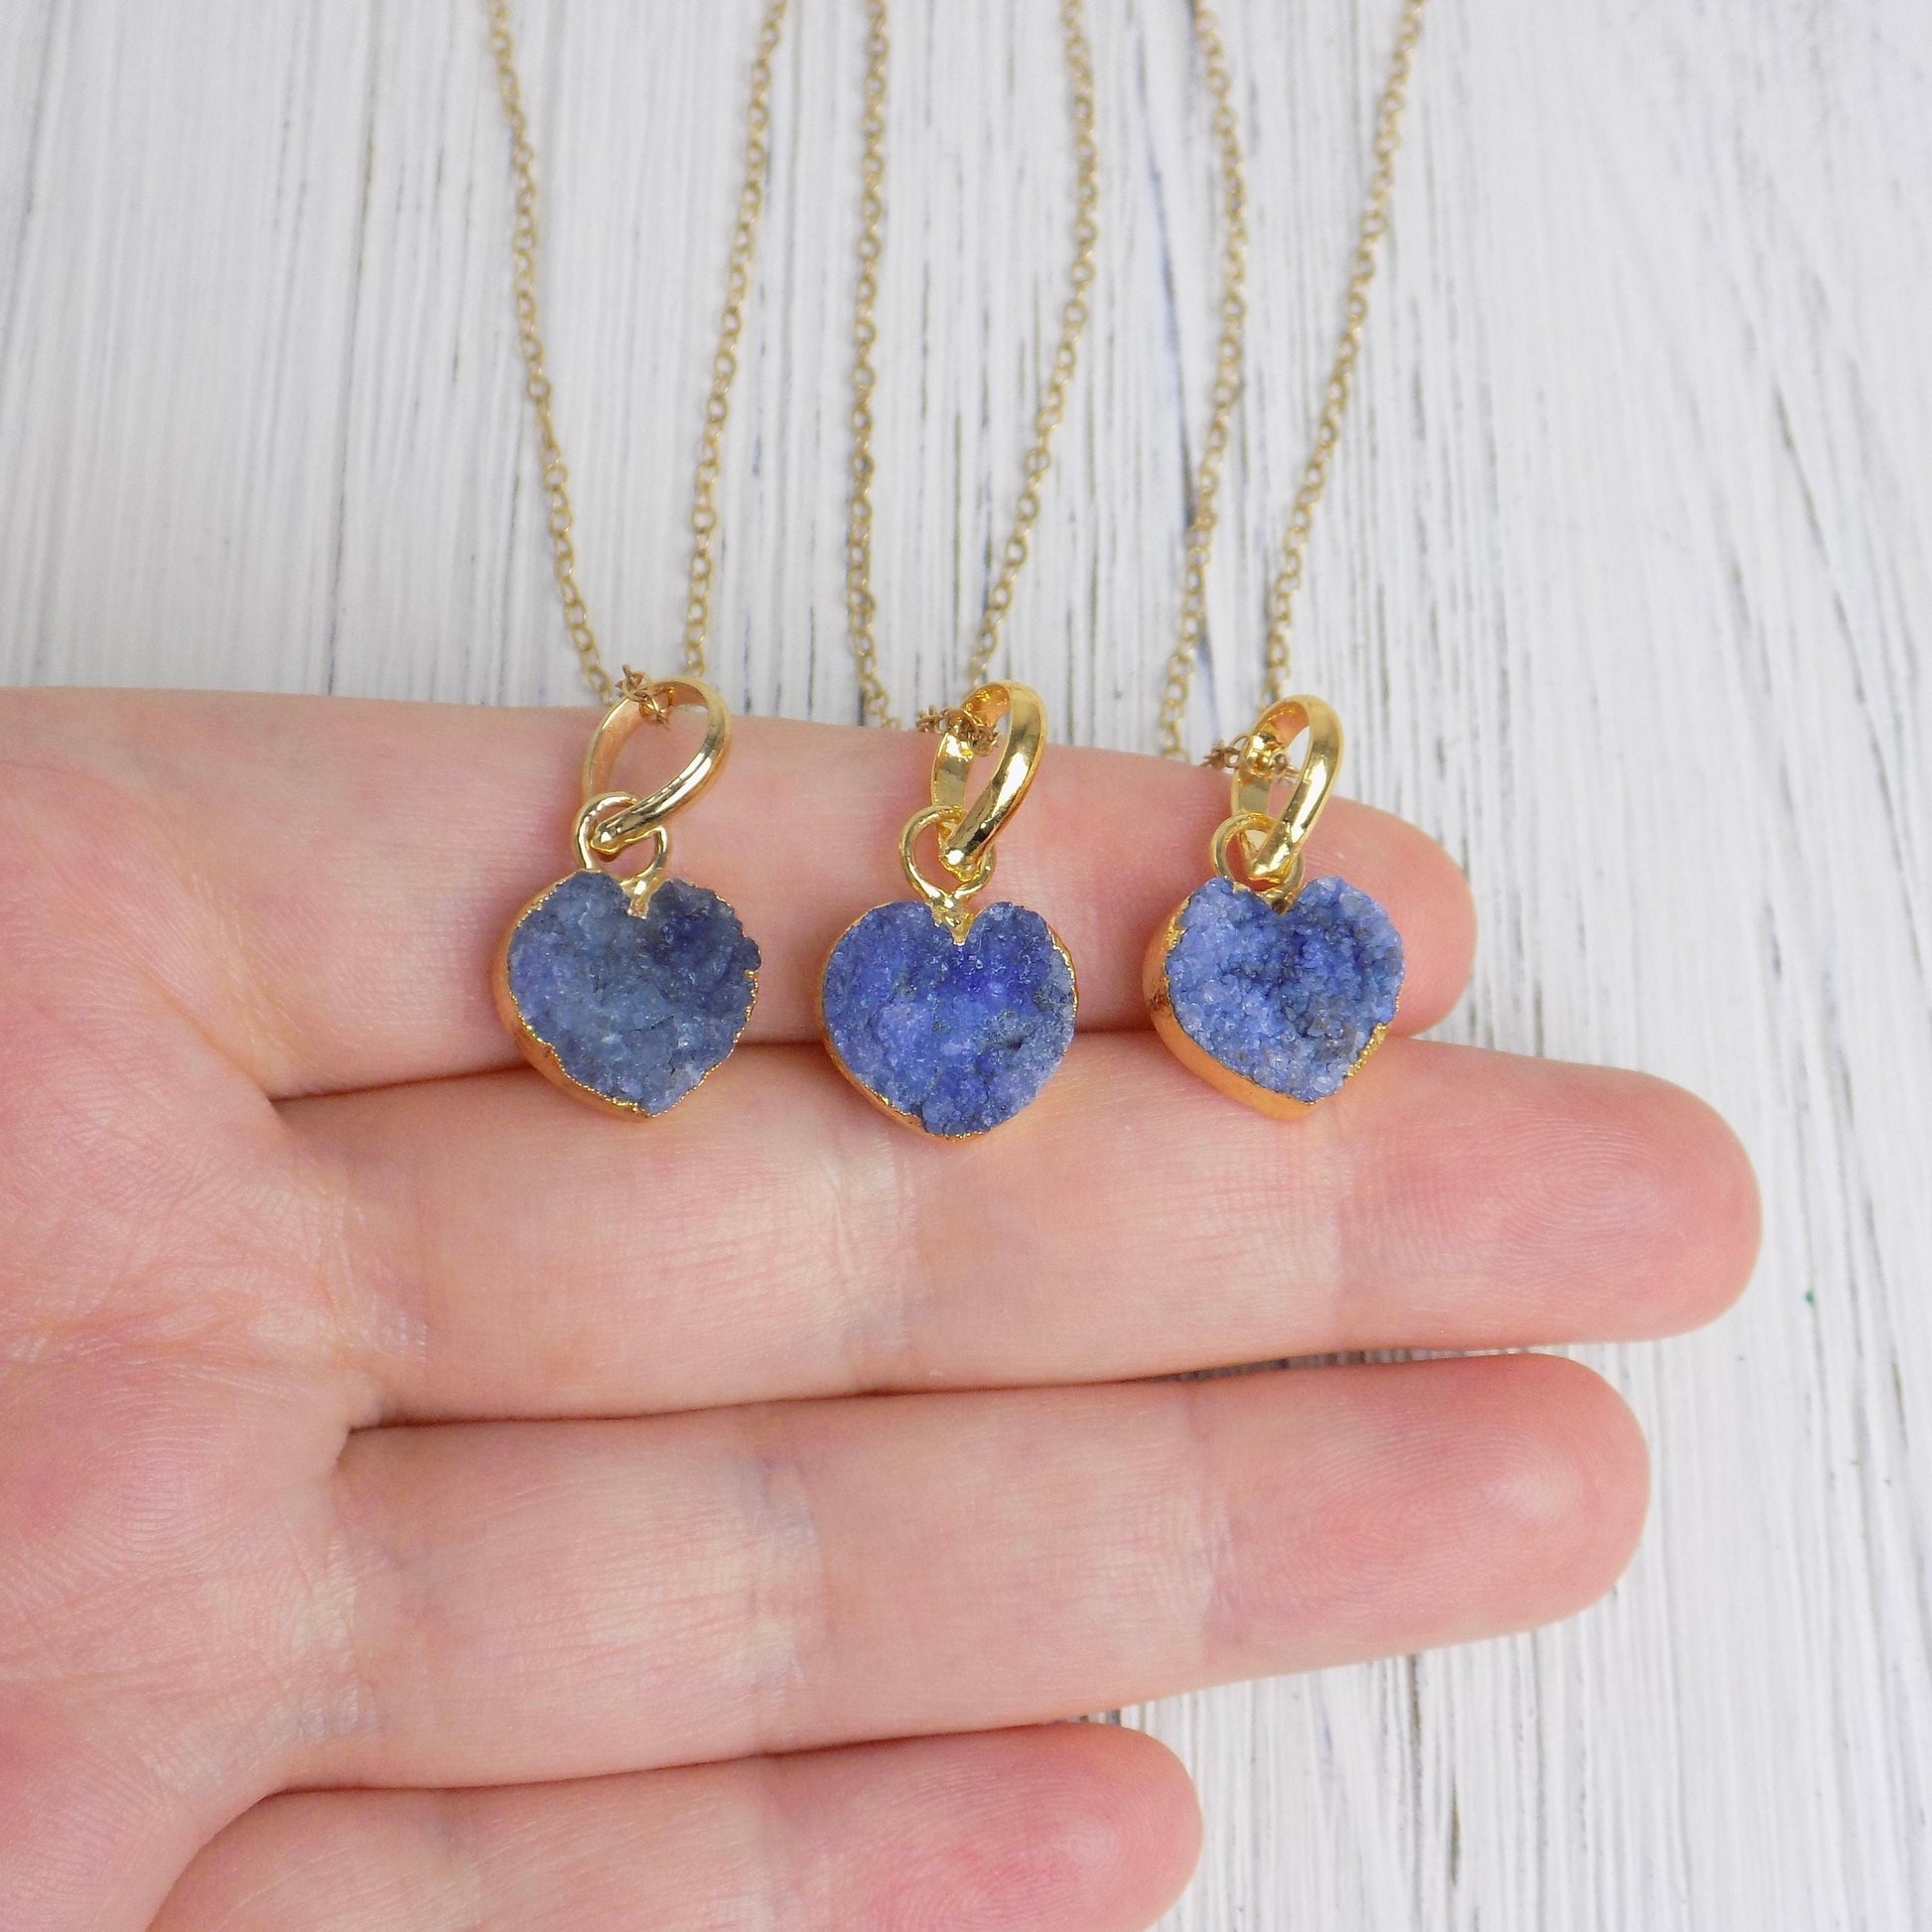 Heart Crystal Necklace, Blue Druzy Pendant, Gift For Her, M6-161